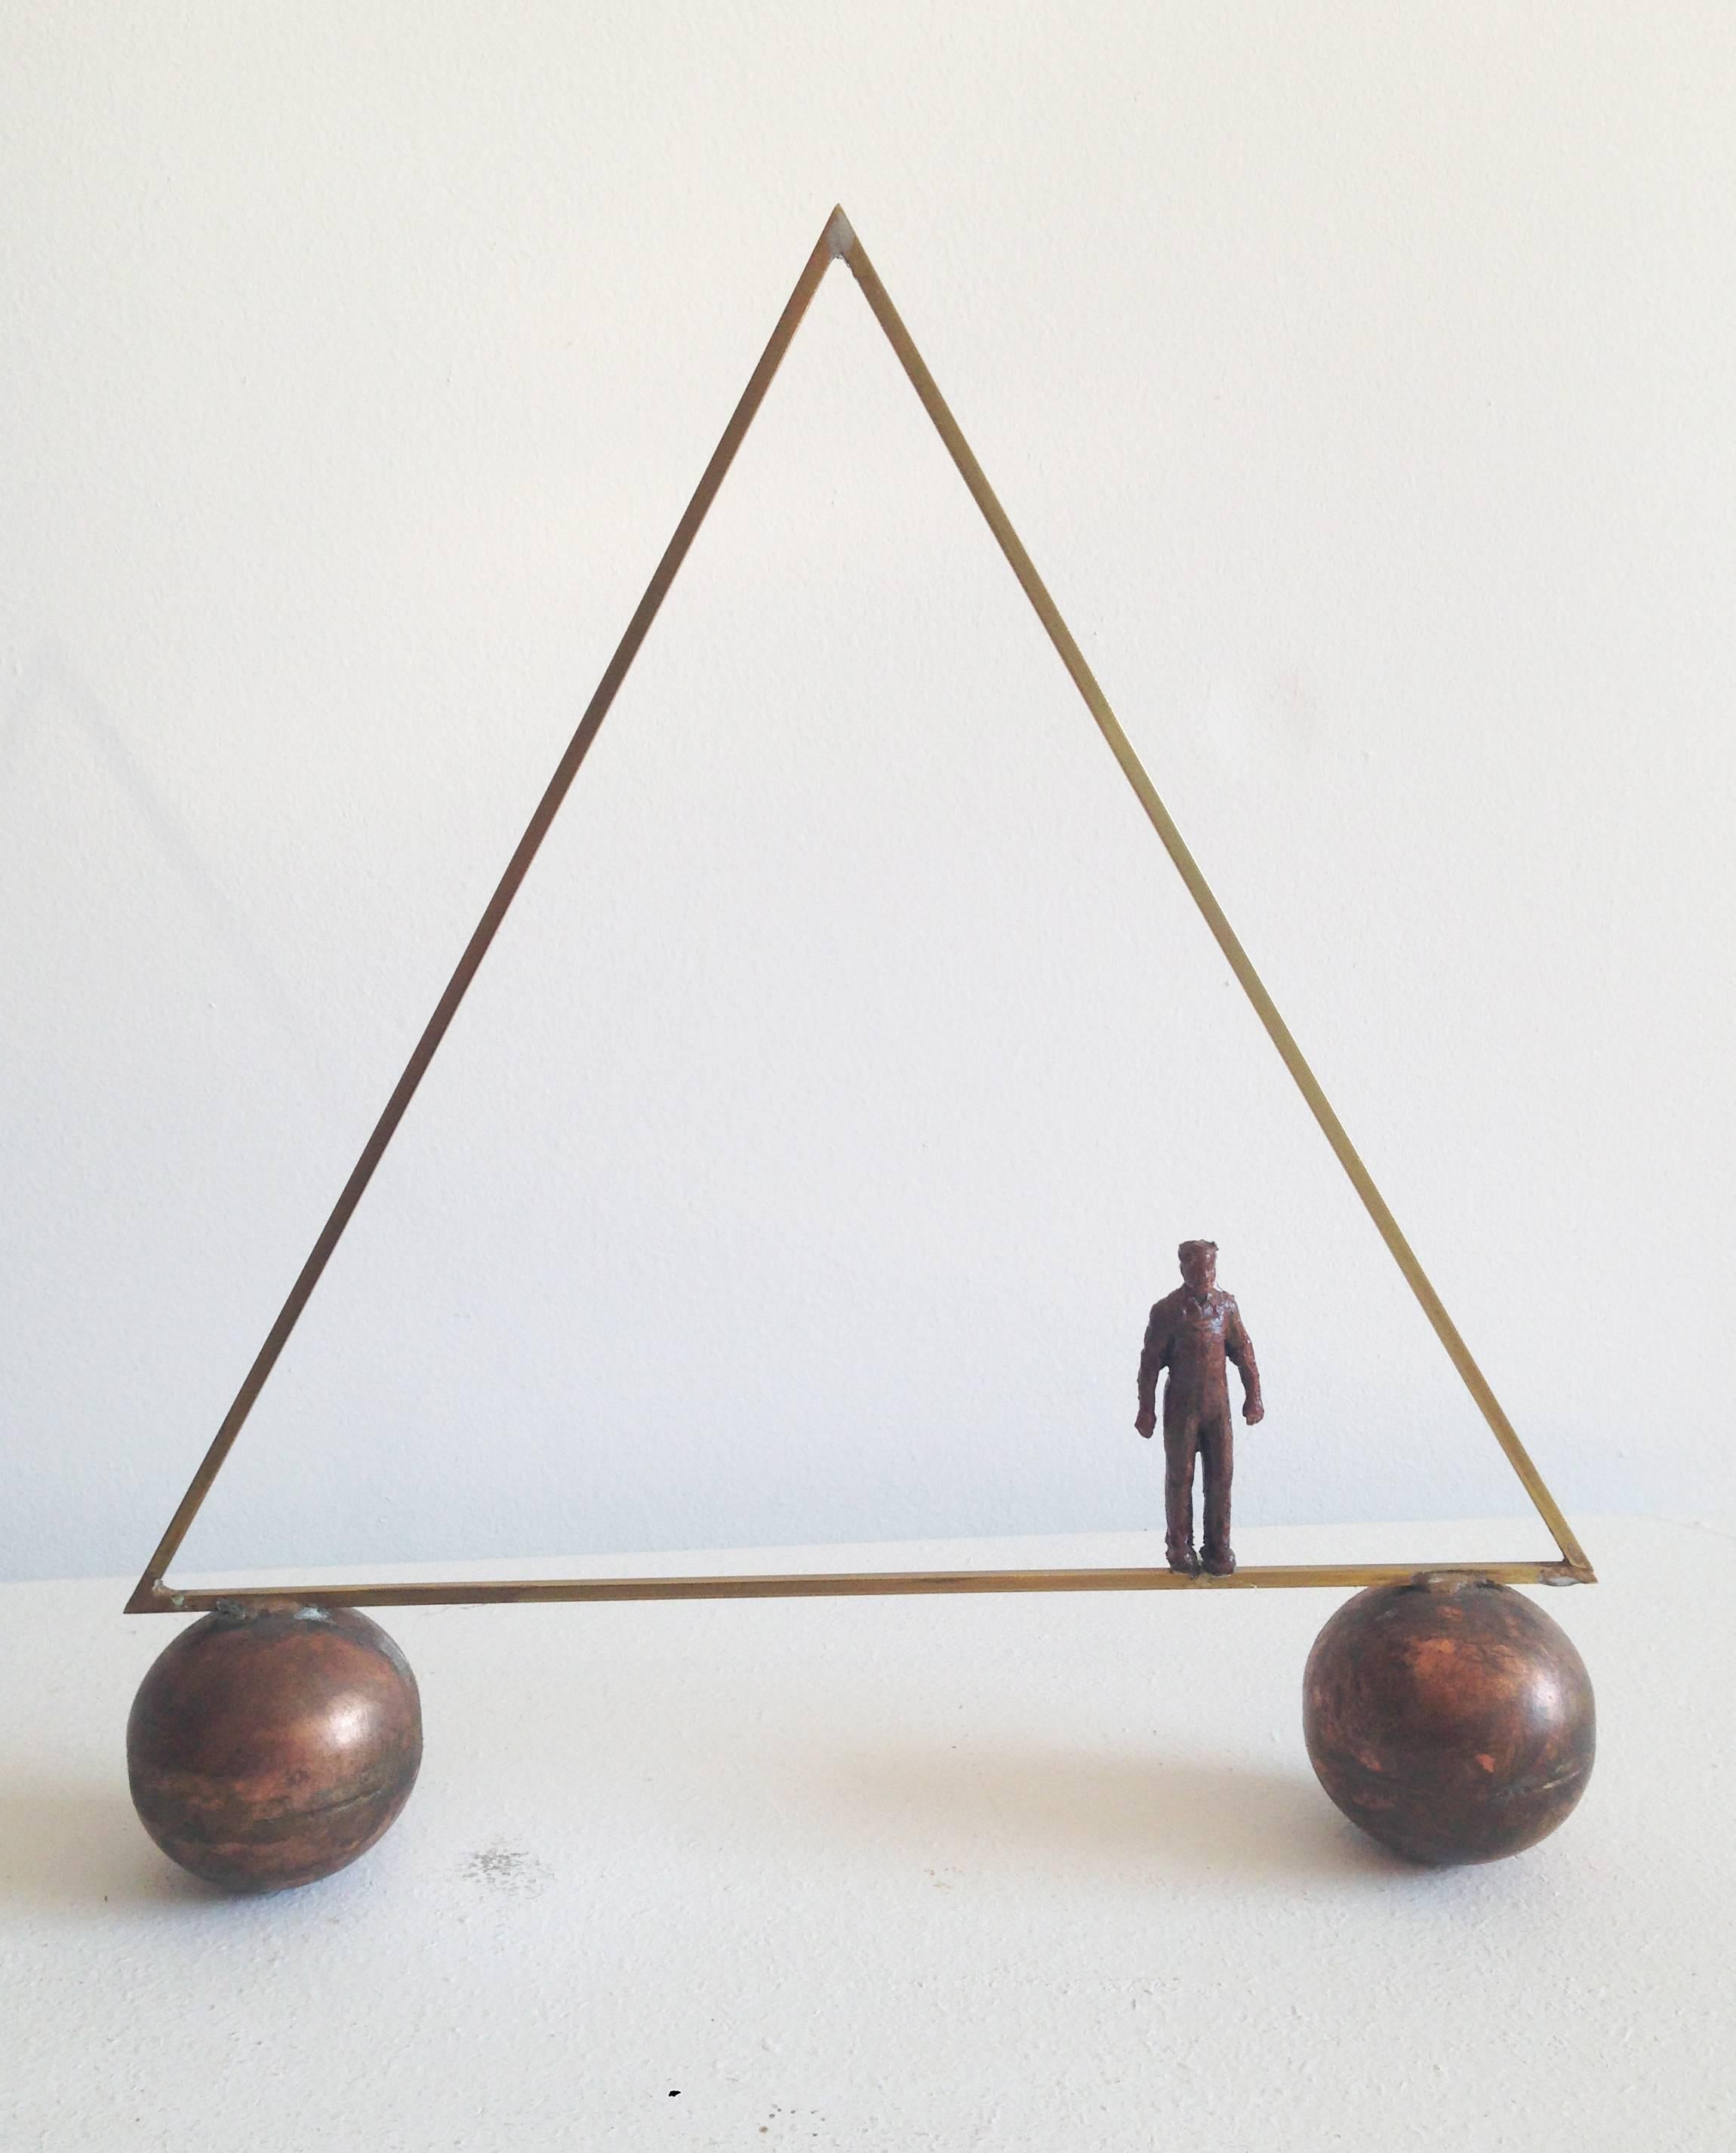 Leon Smith Abstract Sculpture - On Edge (Mid Century Modern Small Scale Triangle Sculpture with Small Figure)